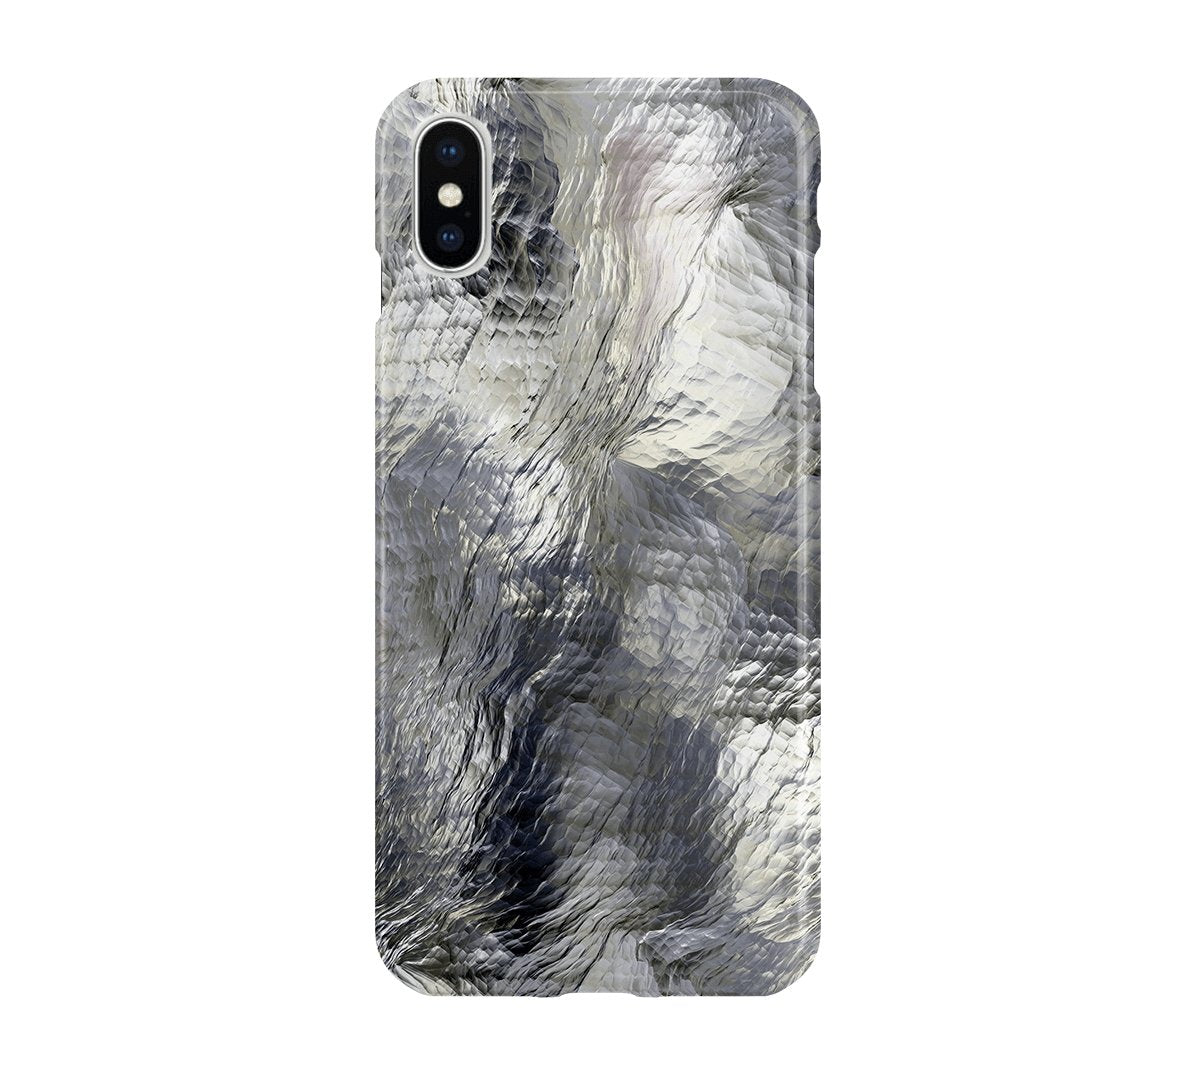 White Prehnite - iPhone phone case designs by CaseSwagger